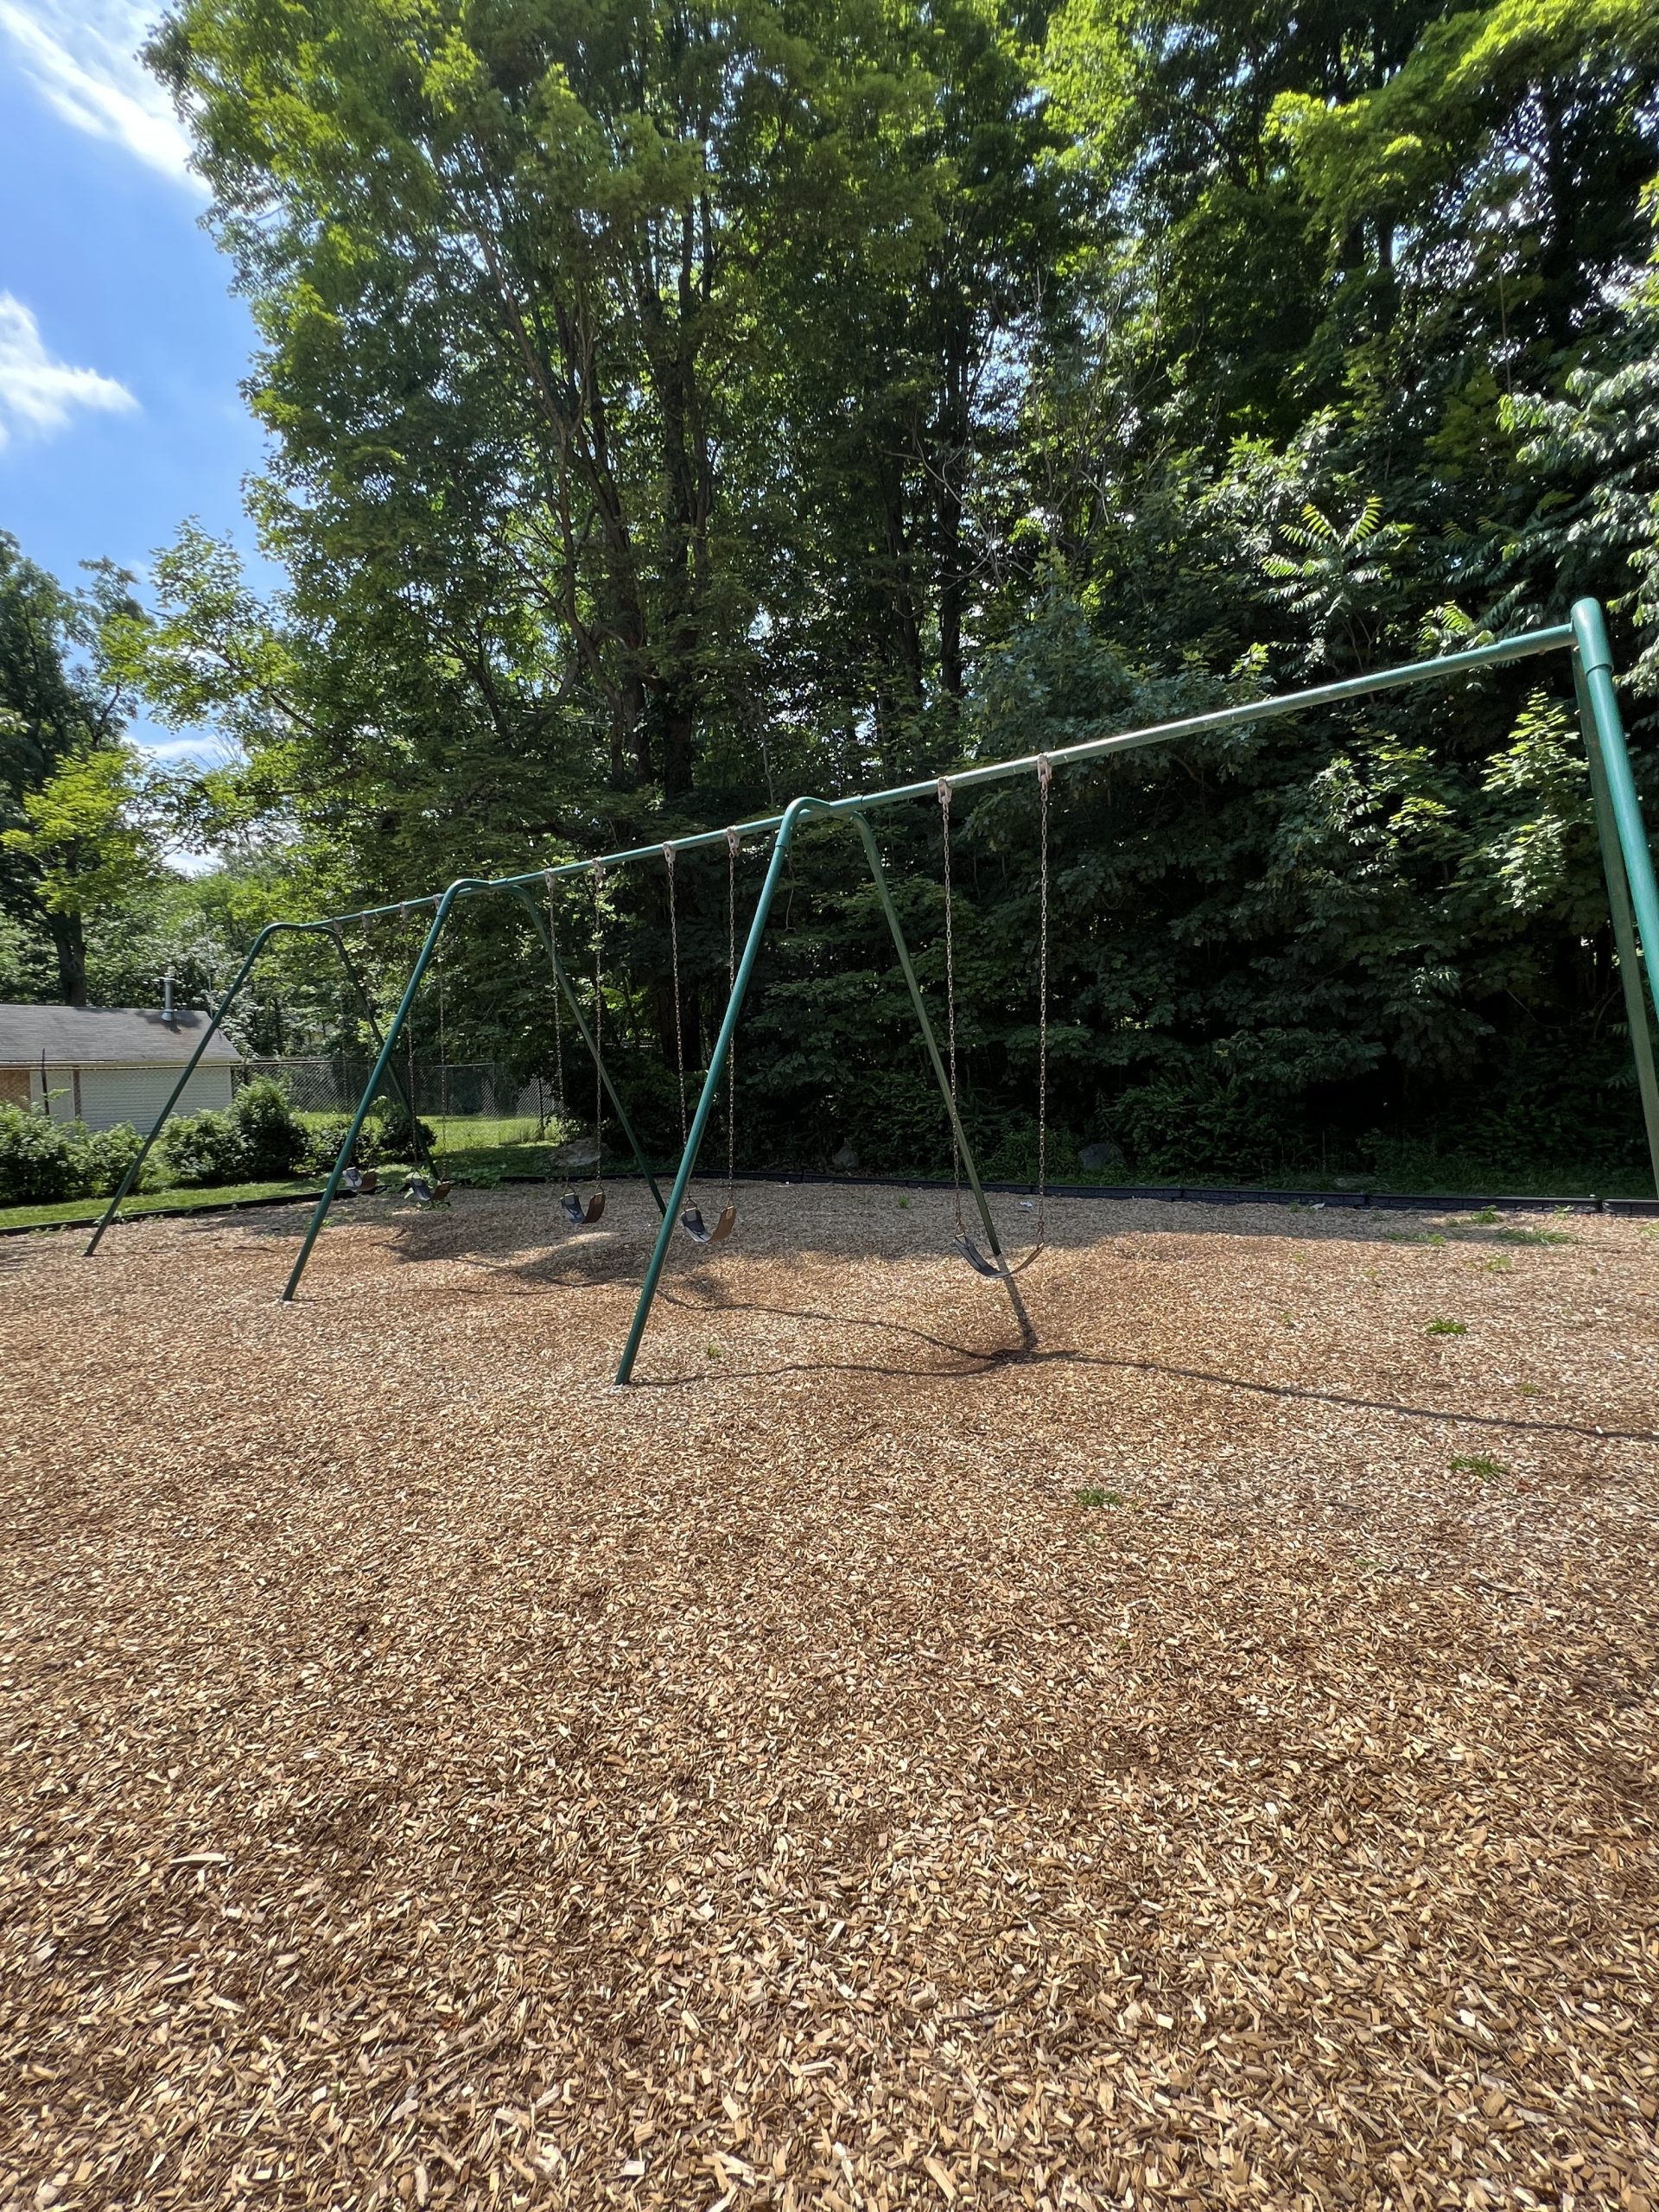 Lake Musconetcong Park Playground in Stanhope NJ - SWINGS - traditional swings TALL image